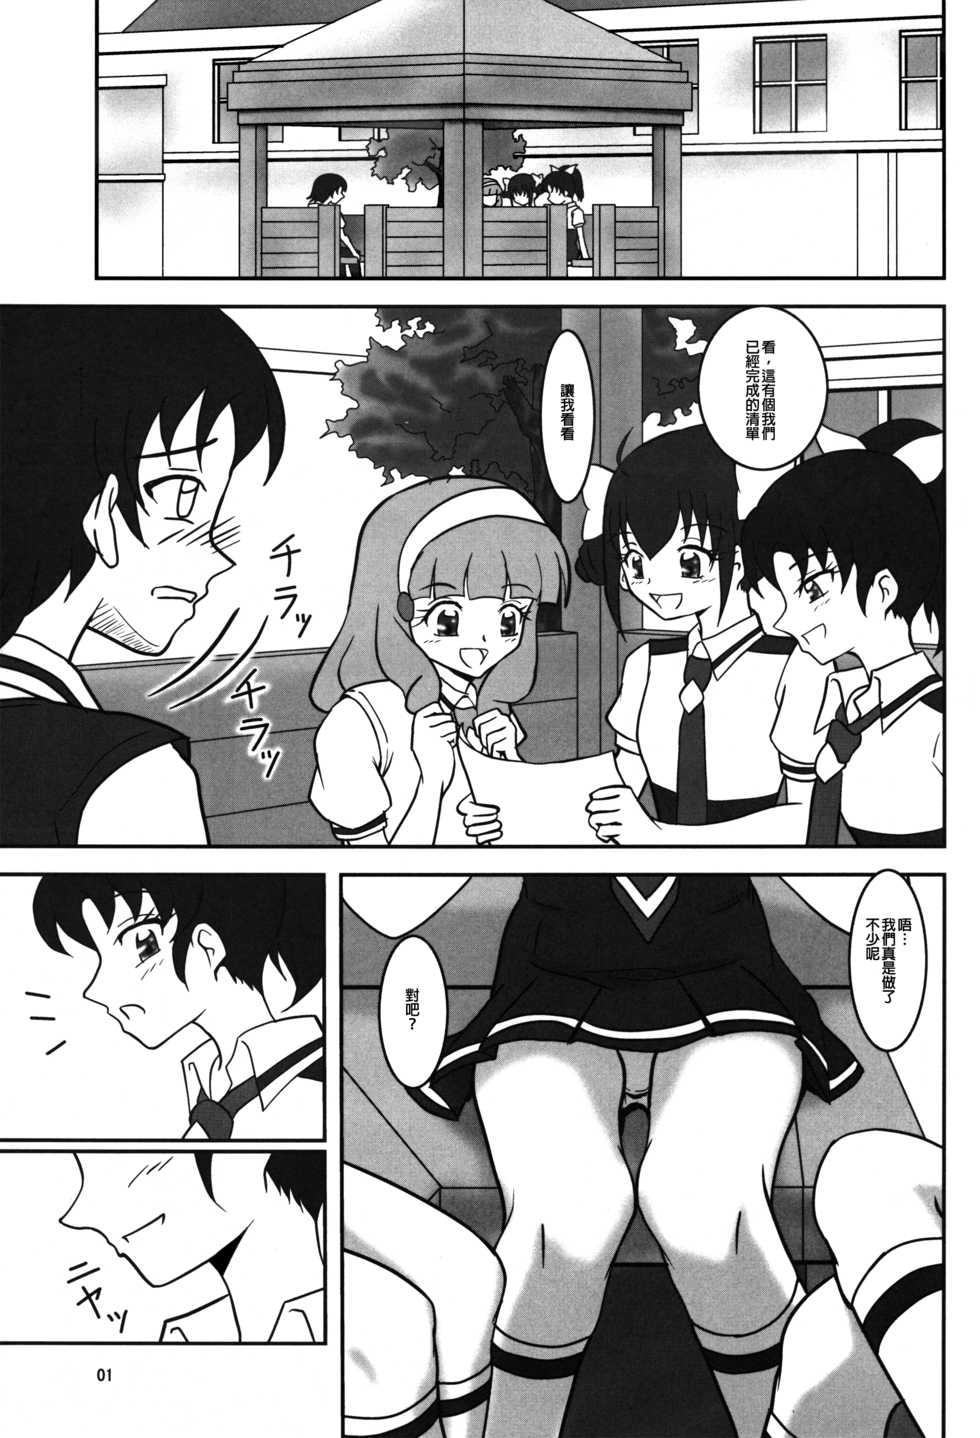 (C82) [AFJ (Ashi_O)] Smell Zuricure | Smell Footycure (Smile Precure!) [Chinese] [沒有漢化] - Page 3